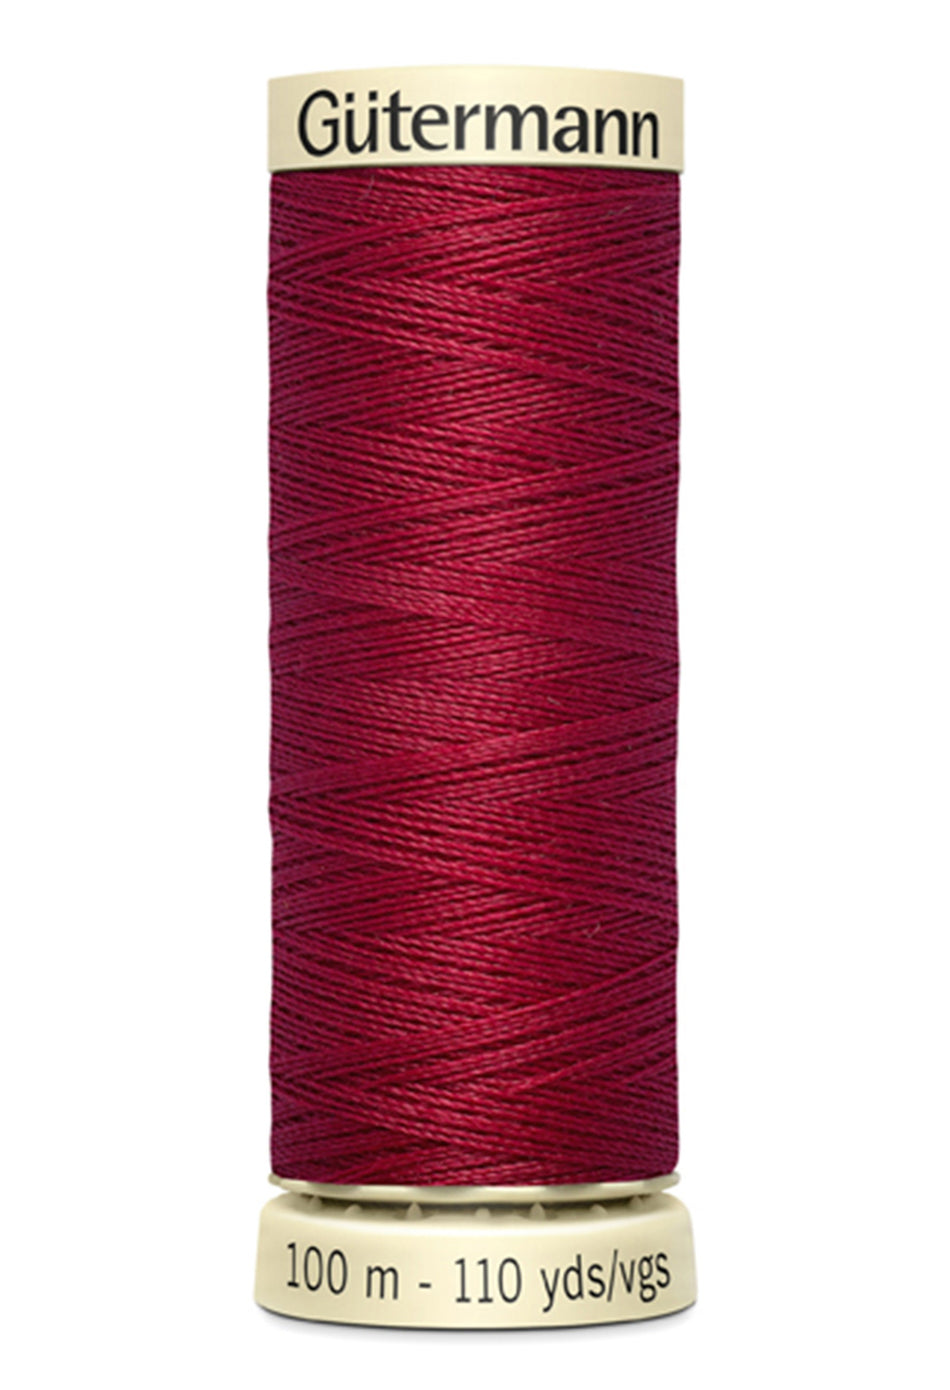 Gutermann Sew-All Polyester 430 Ruby Red 100m/110yd